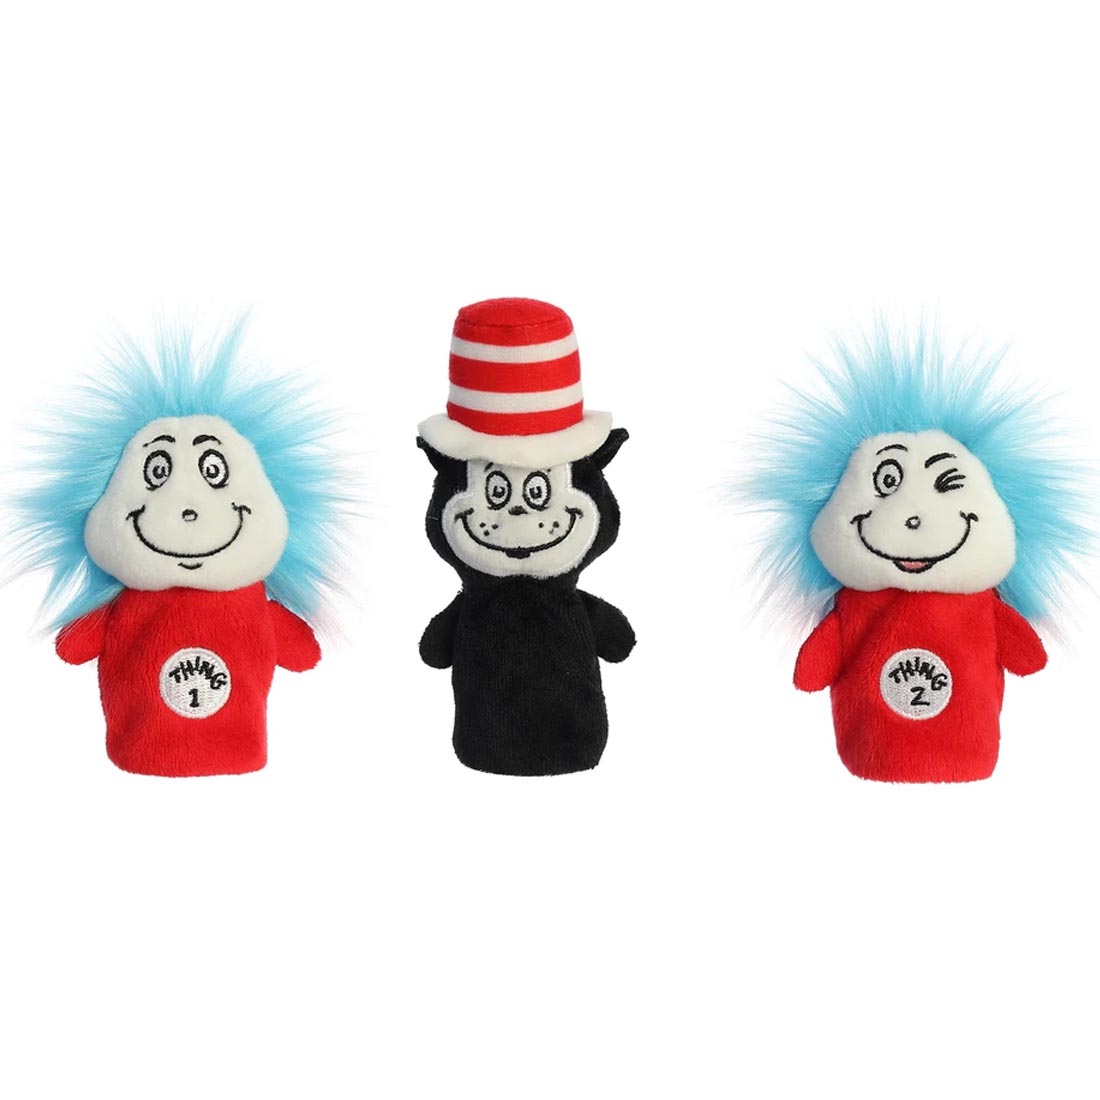 Dr. Seuss Finger Puppet Set with Thing 1 and Thing 2 and Cat in the Hat